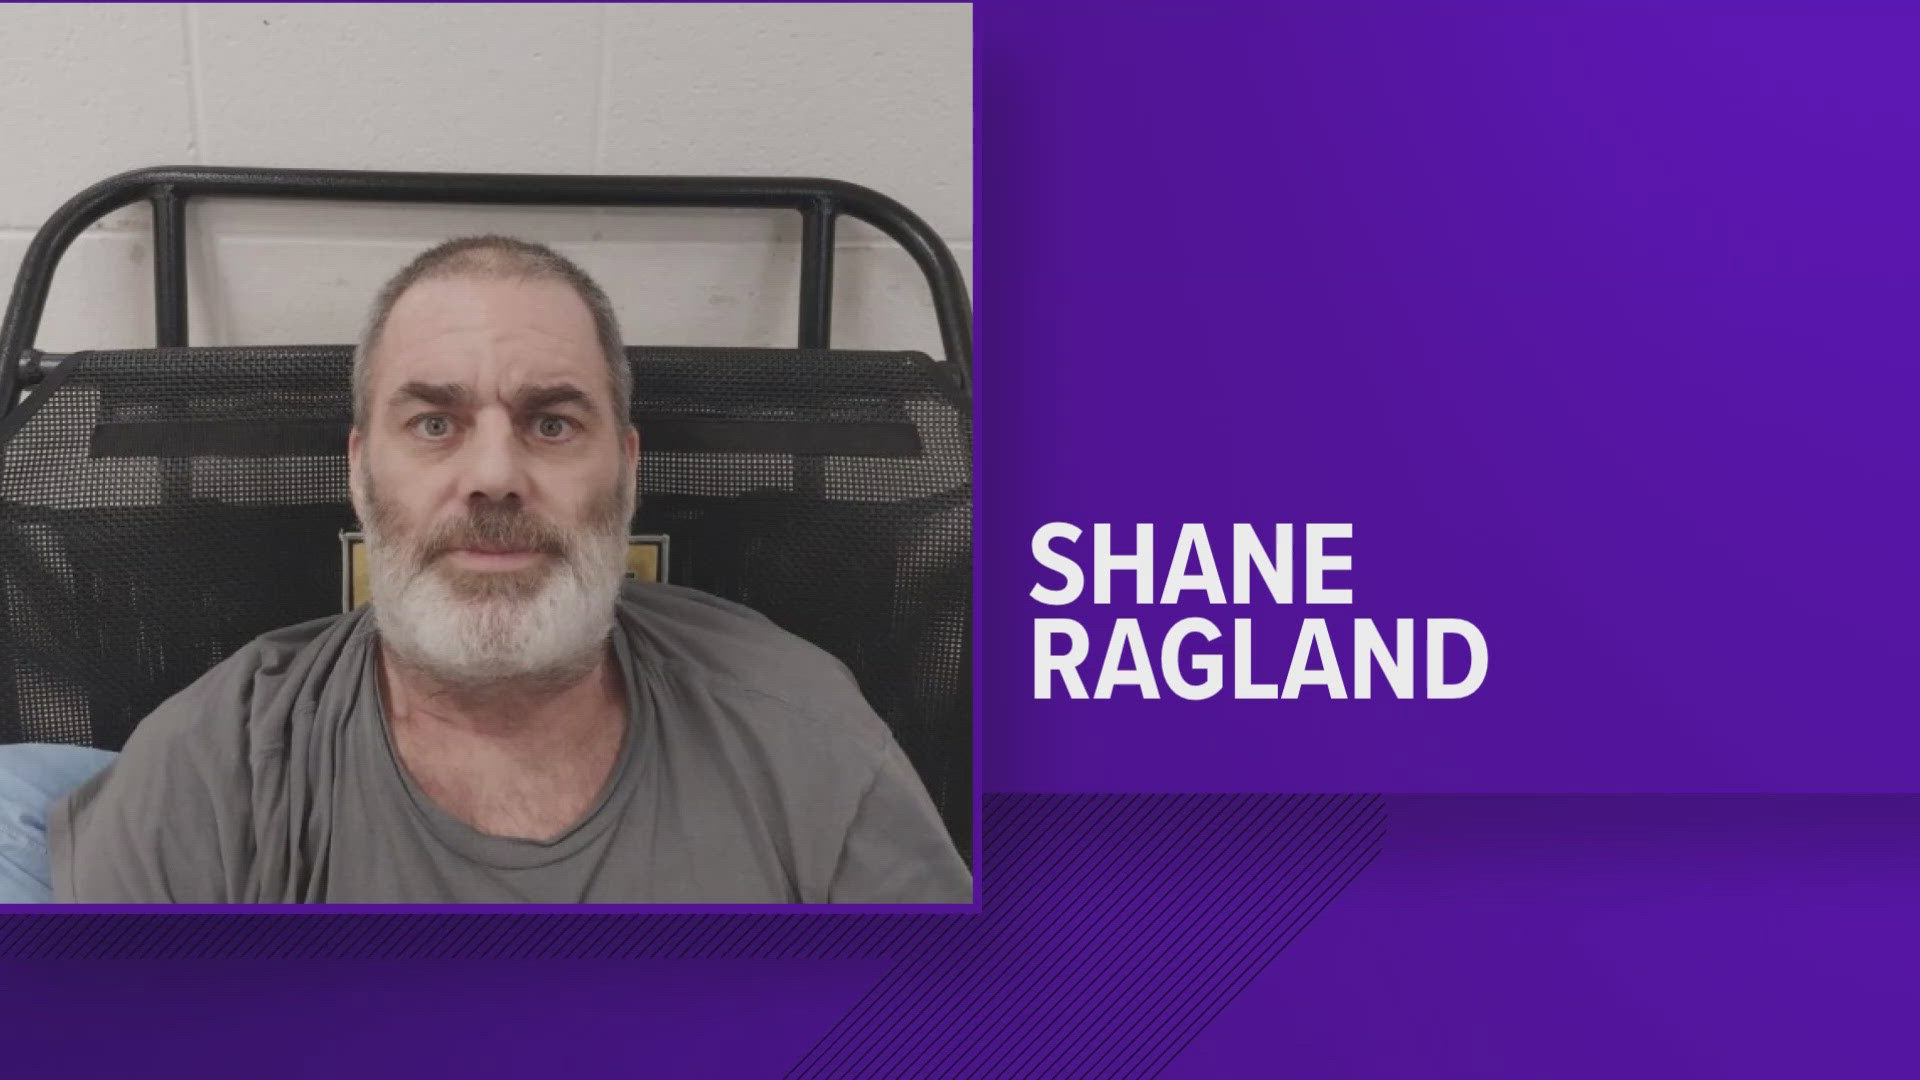 Shane Ragland has been charged with assault and terroristic threatening.